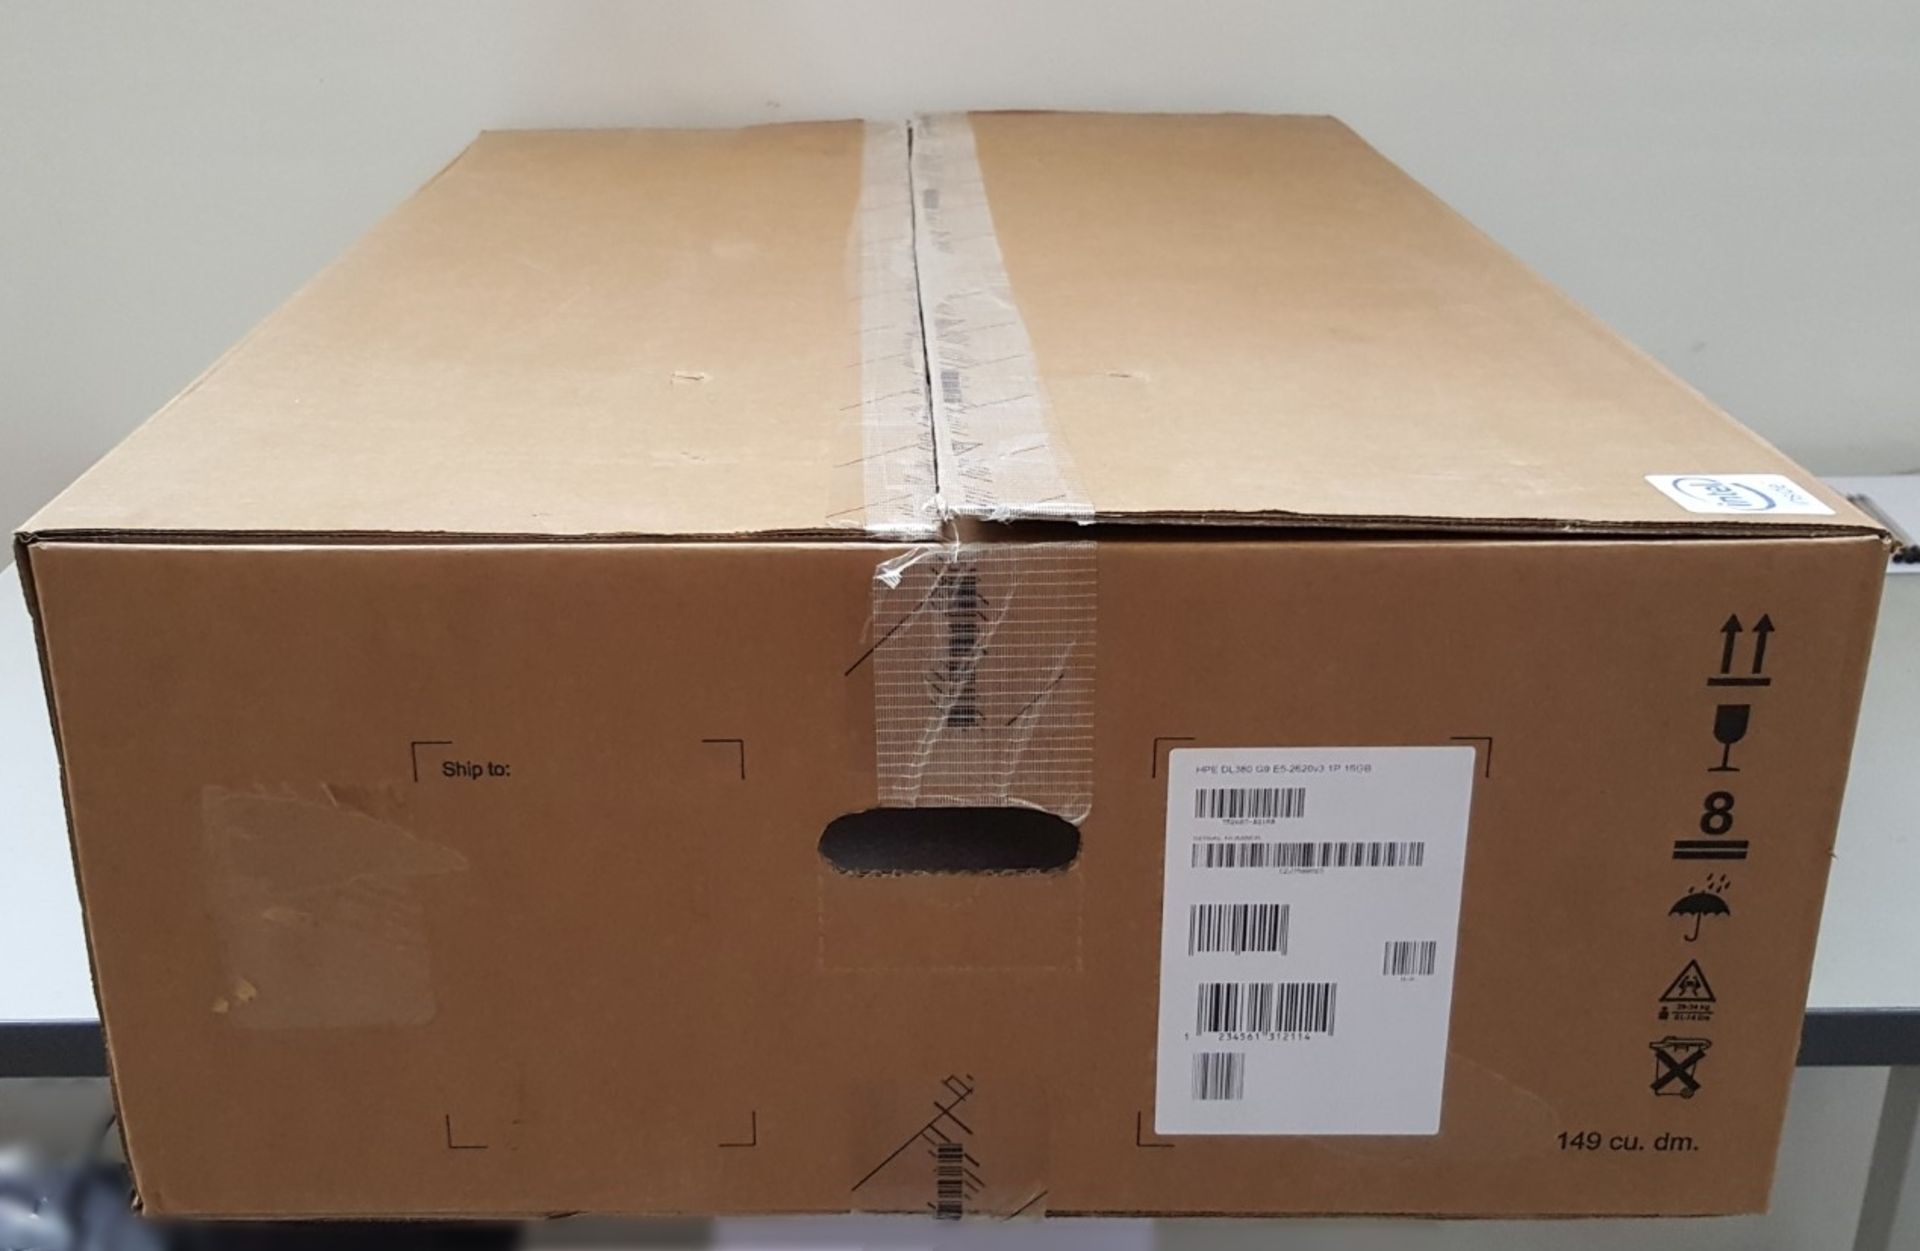 1 x New In Box HP ProLiant DL380 G9 PC Server - Ref LD397 - Image 2 of 5